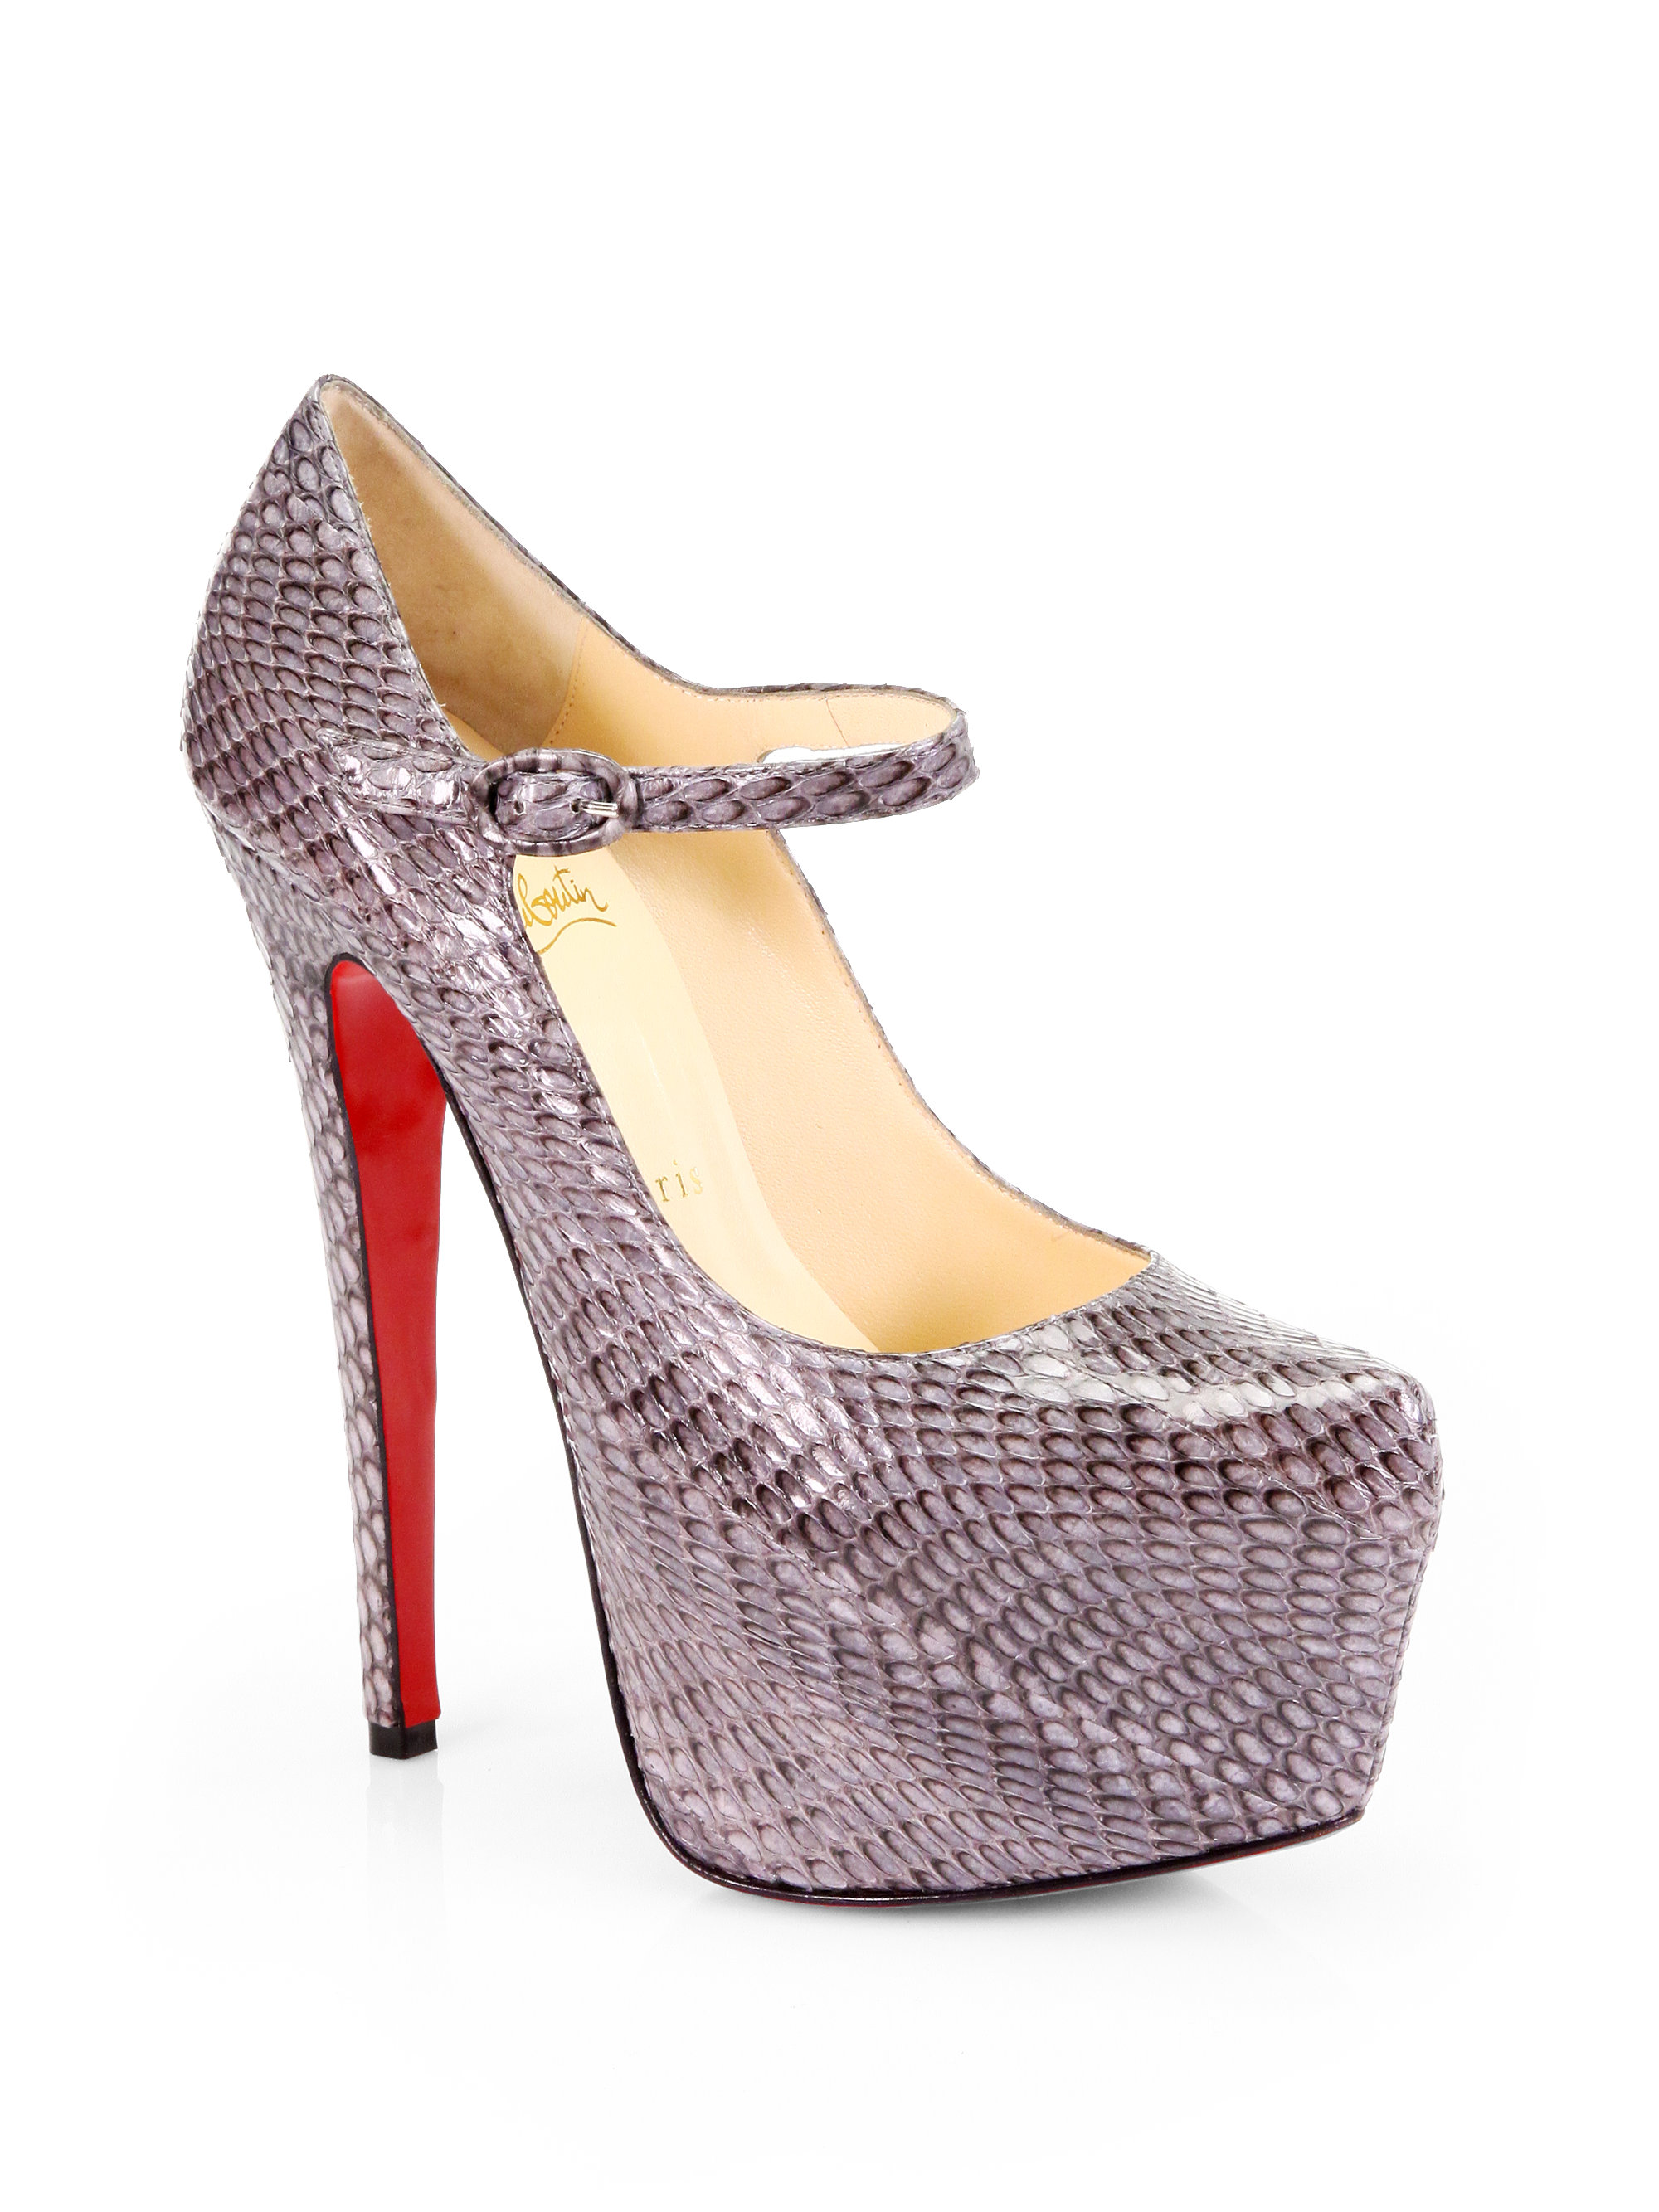 Christian louboutin Lady Daf 160 Cobra Mary Jane Pumps in Gray ...